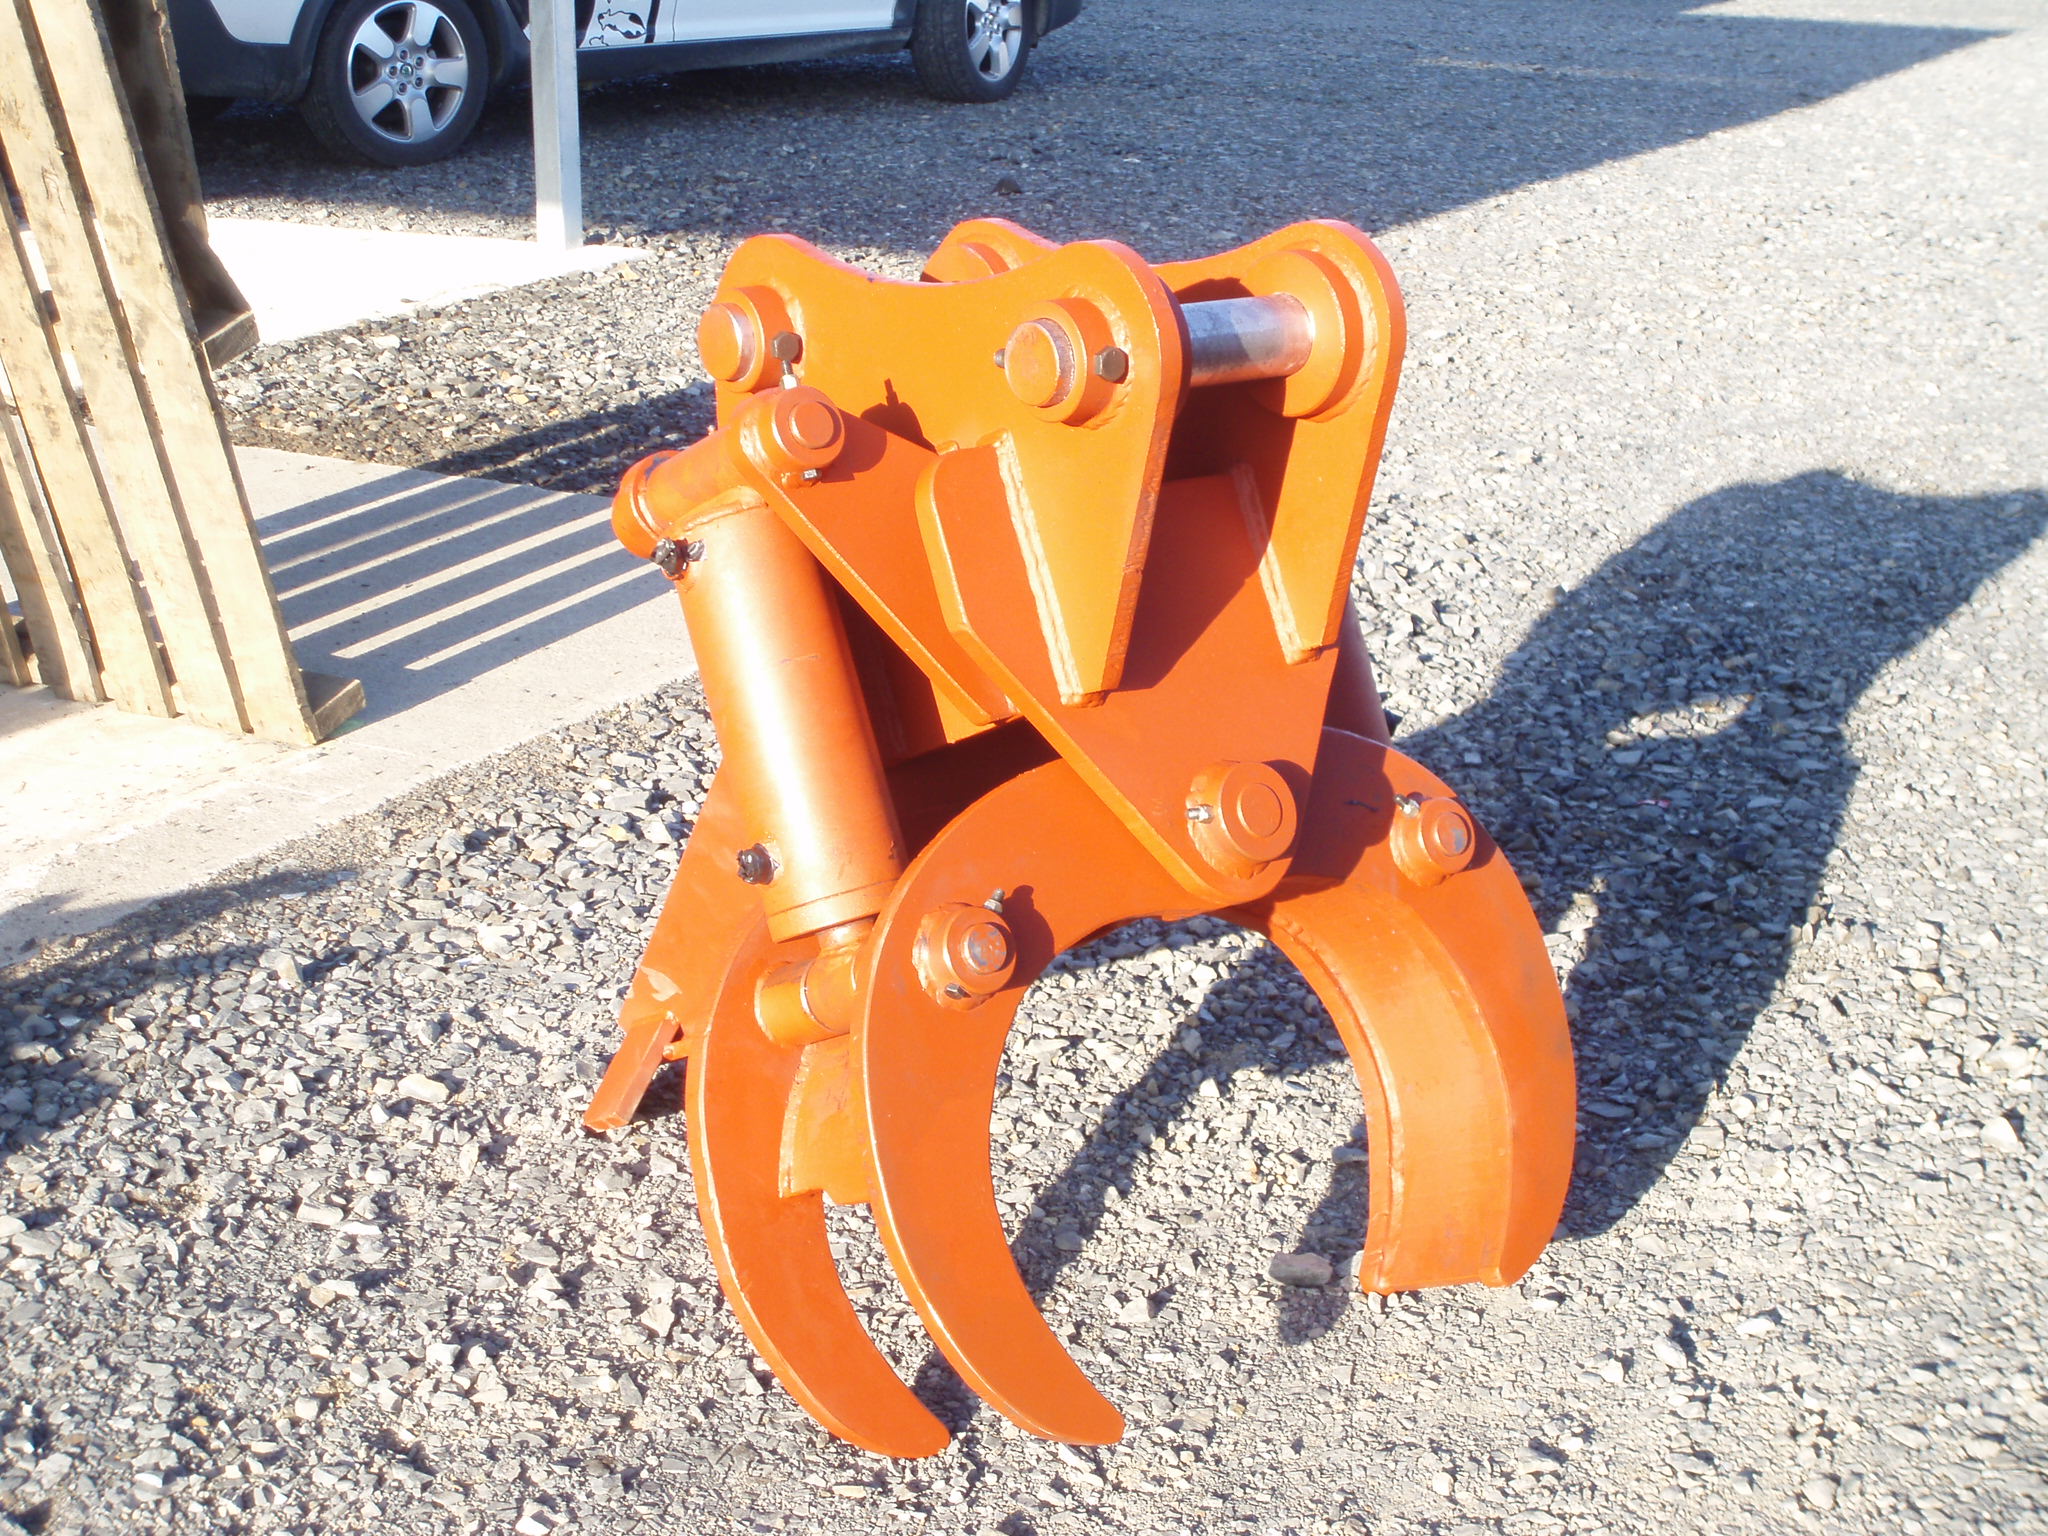 Digger Grapple for holding and driving piles